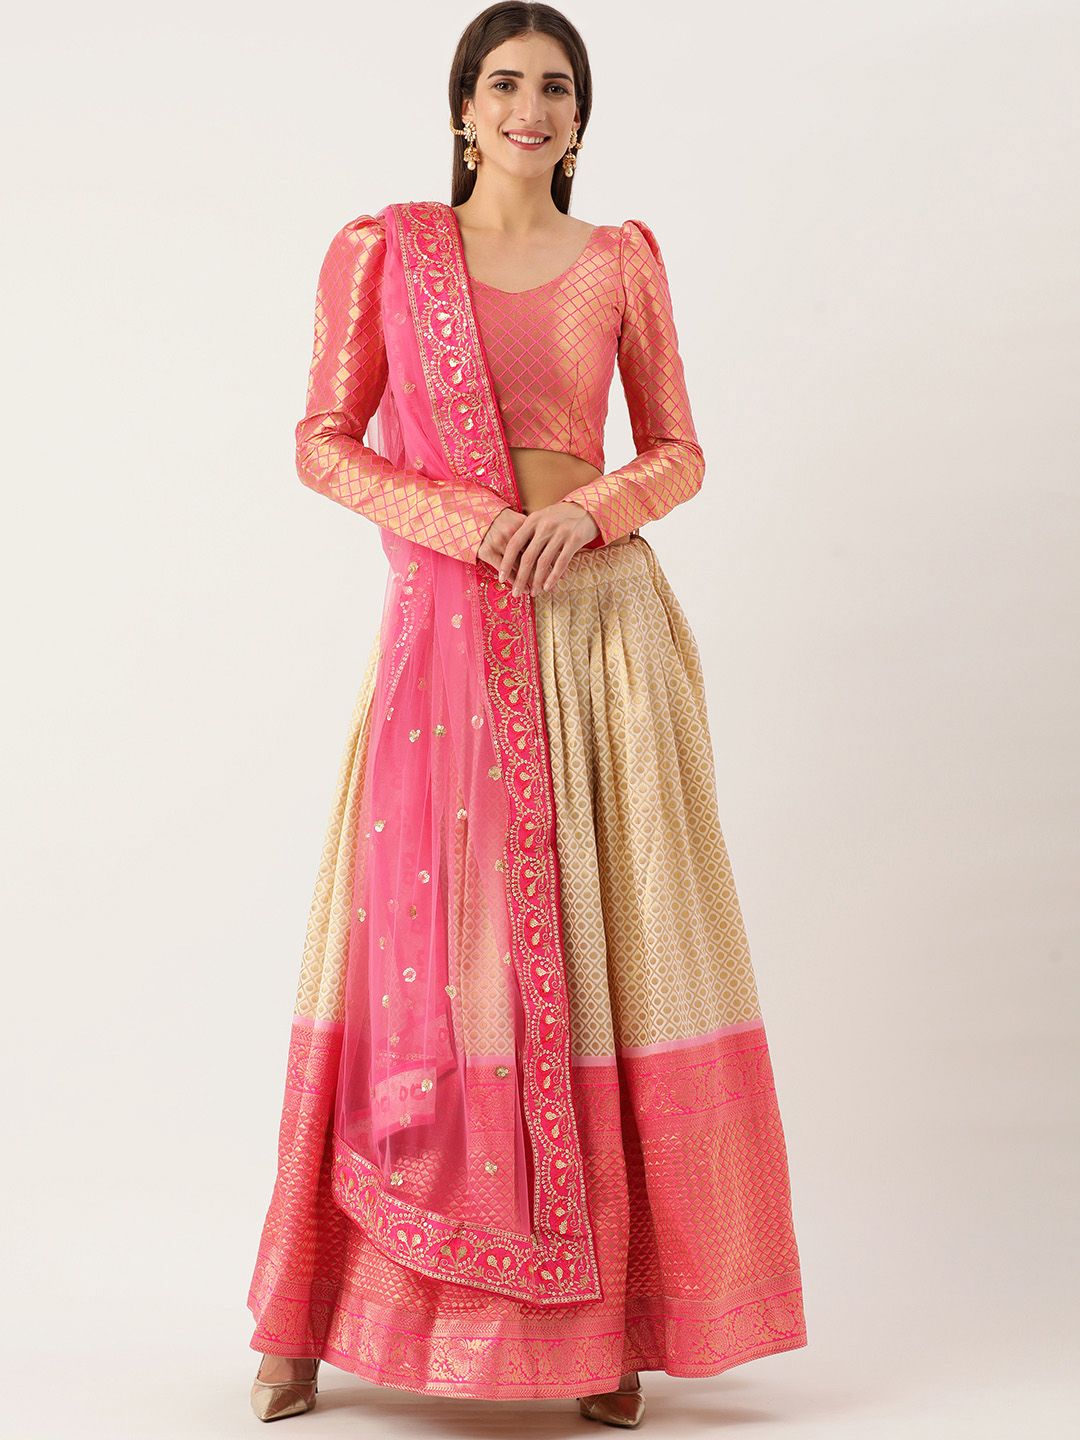 LOOKNBOOK ART Cream-Coloured Semi-Stitched Lehenga & Unstitched Blouse With Dupatta Price in India